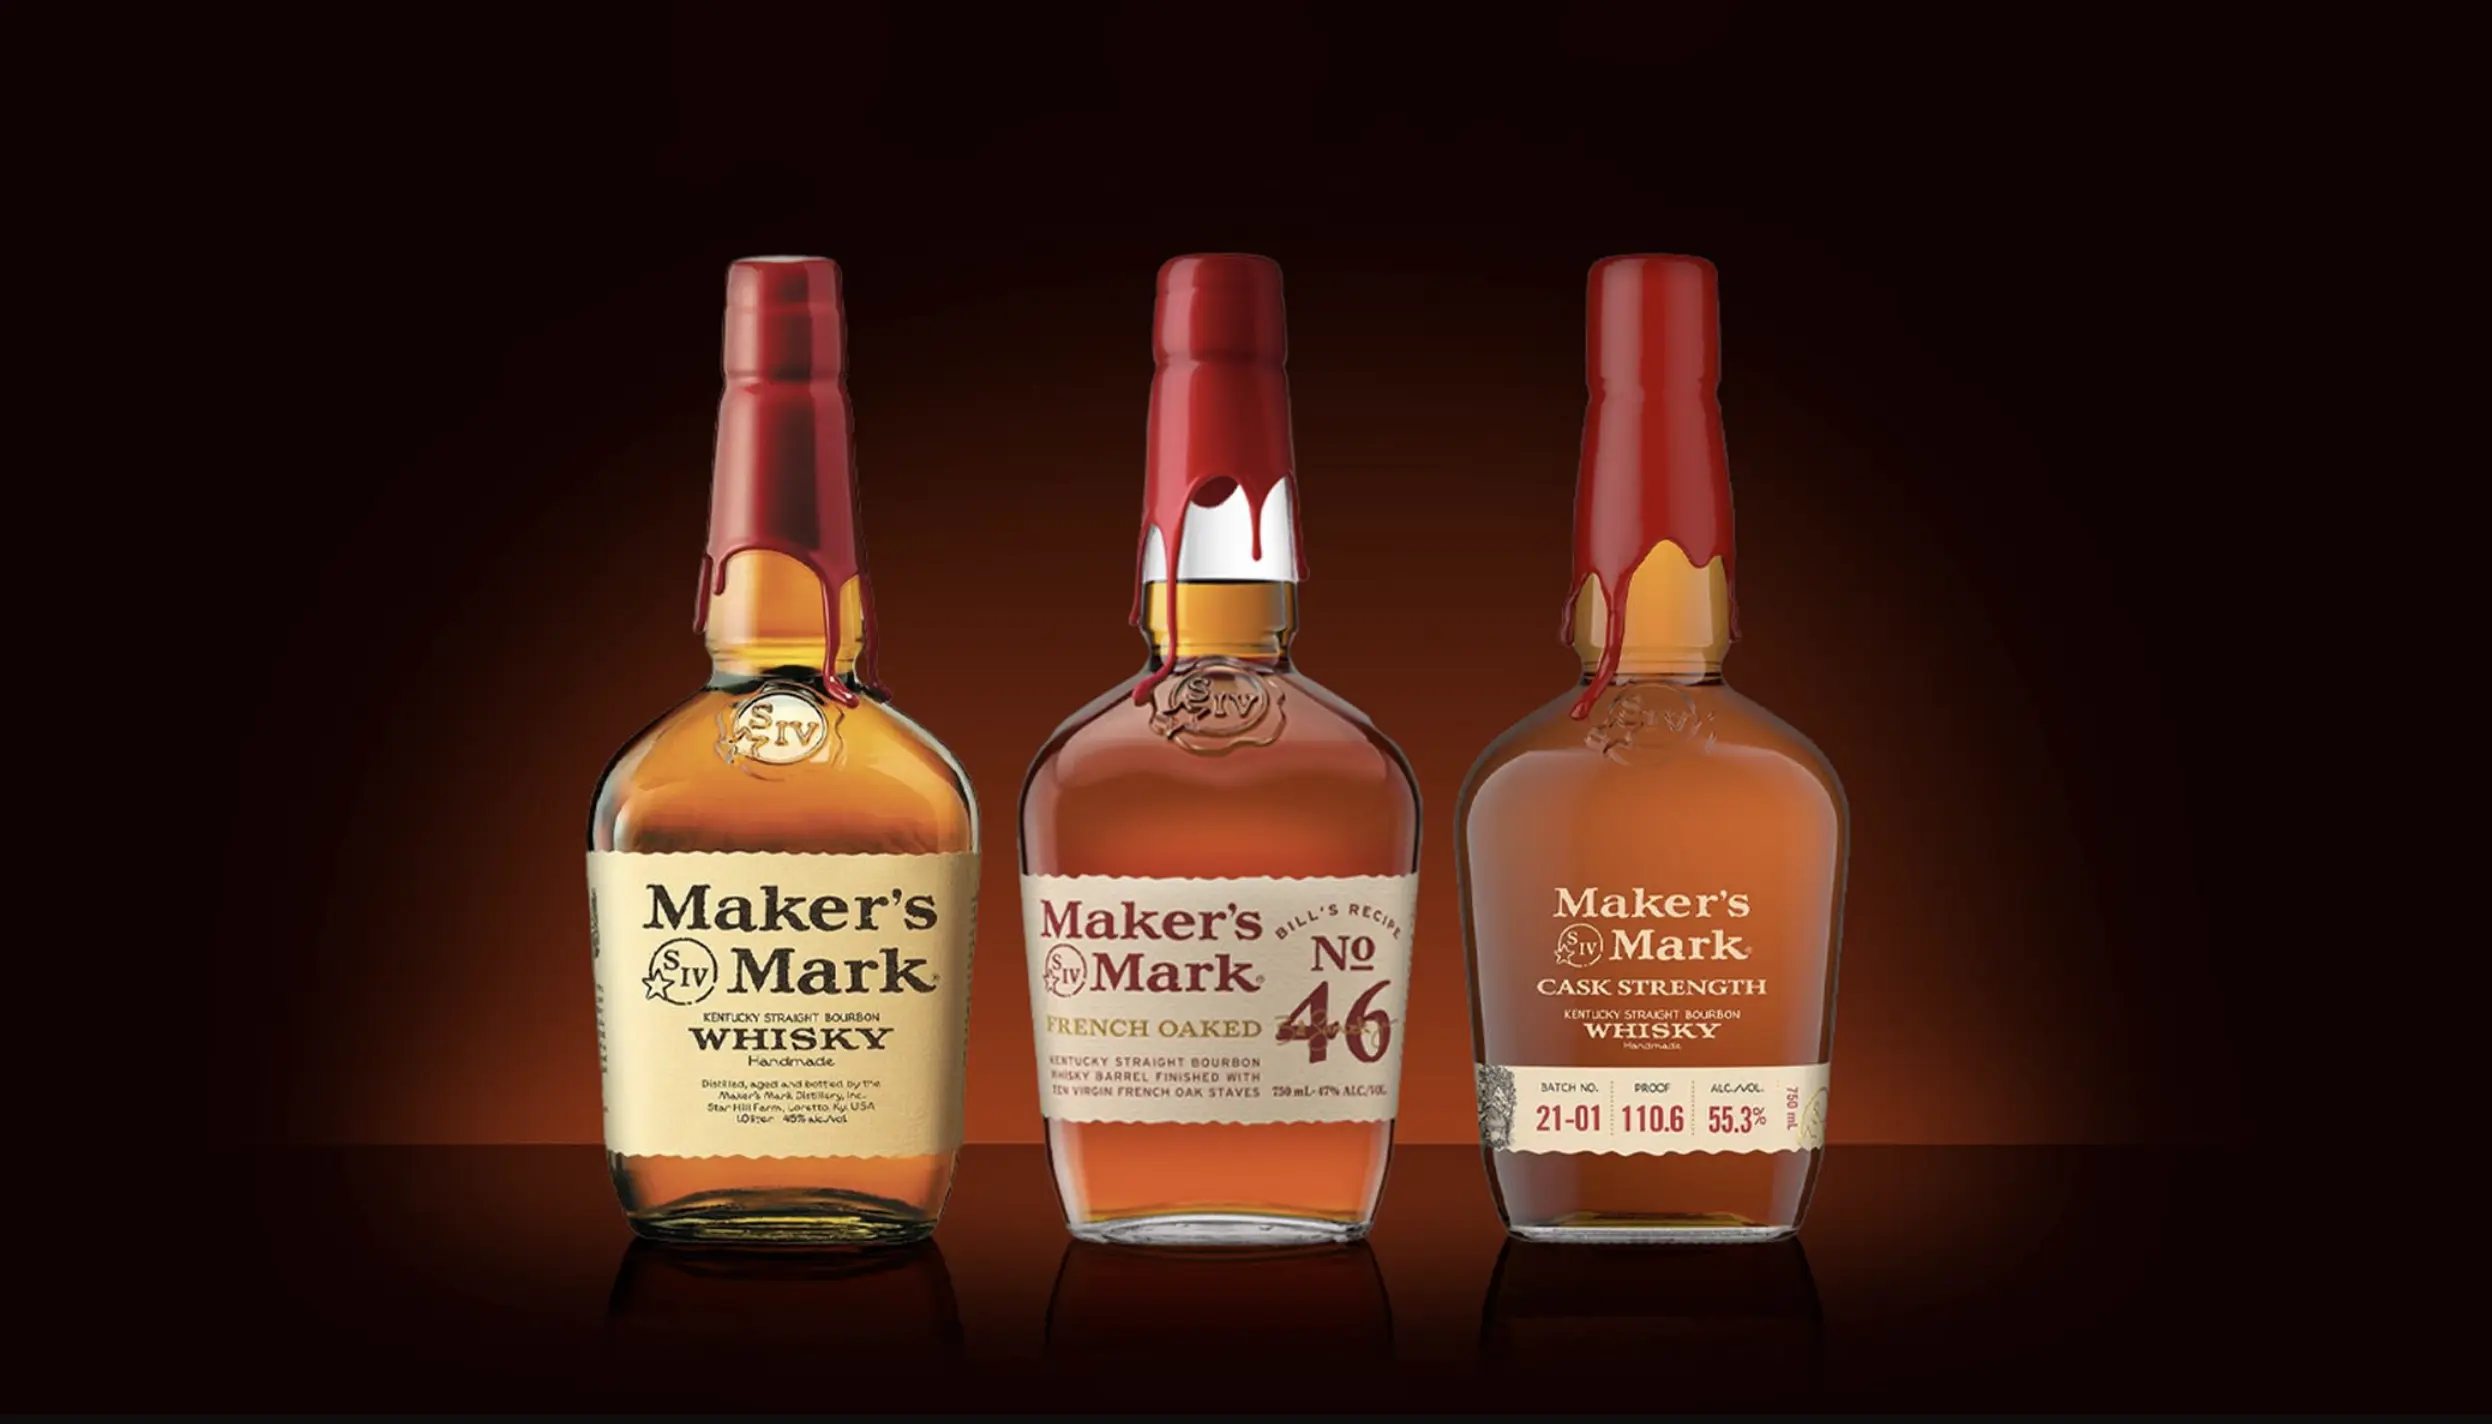 What is Maker's Mark Whisky Price?